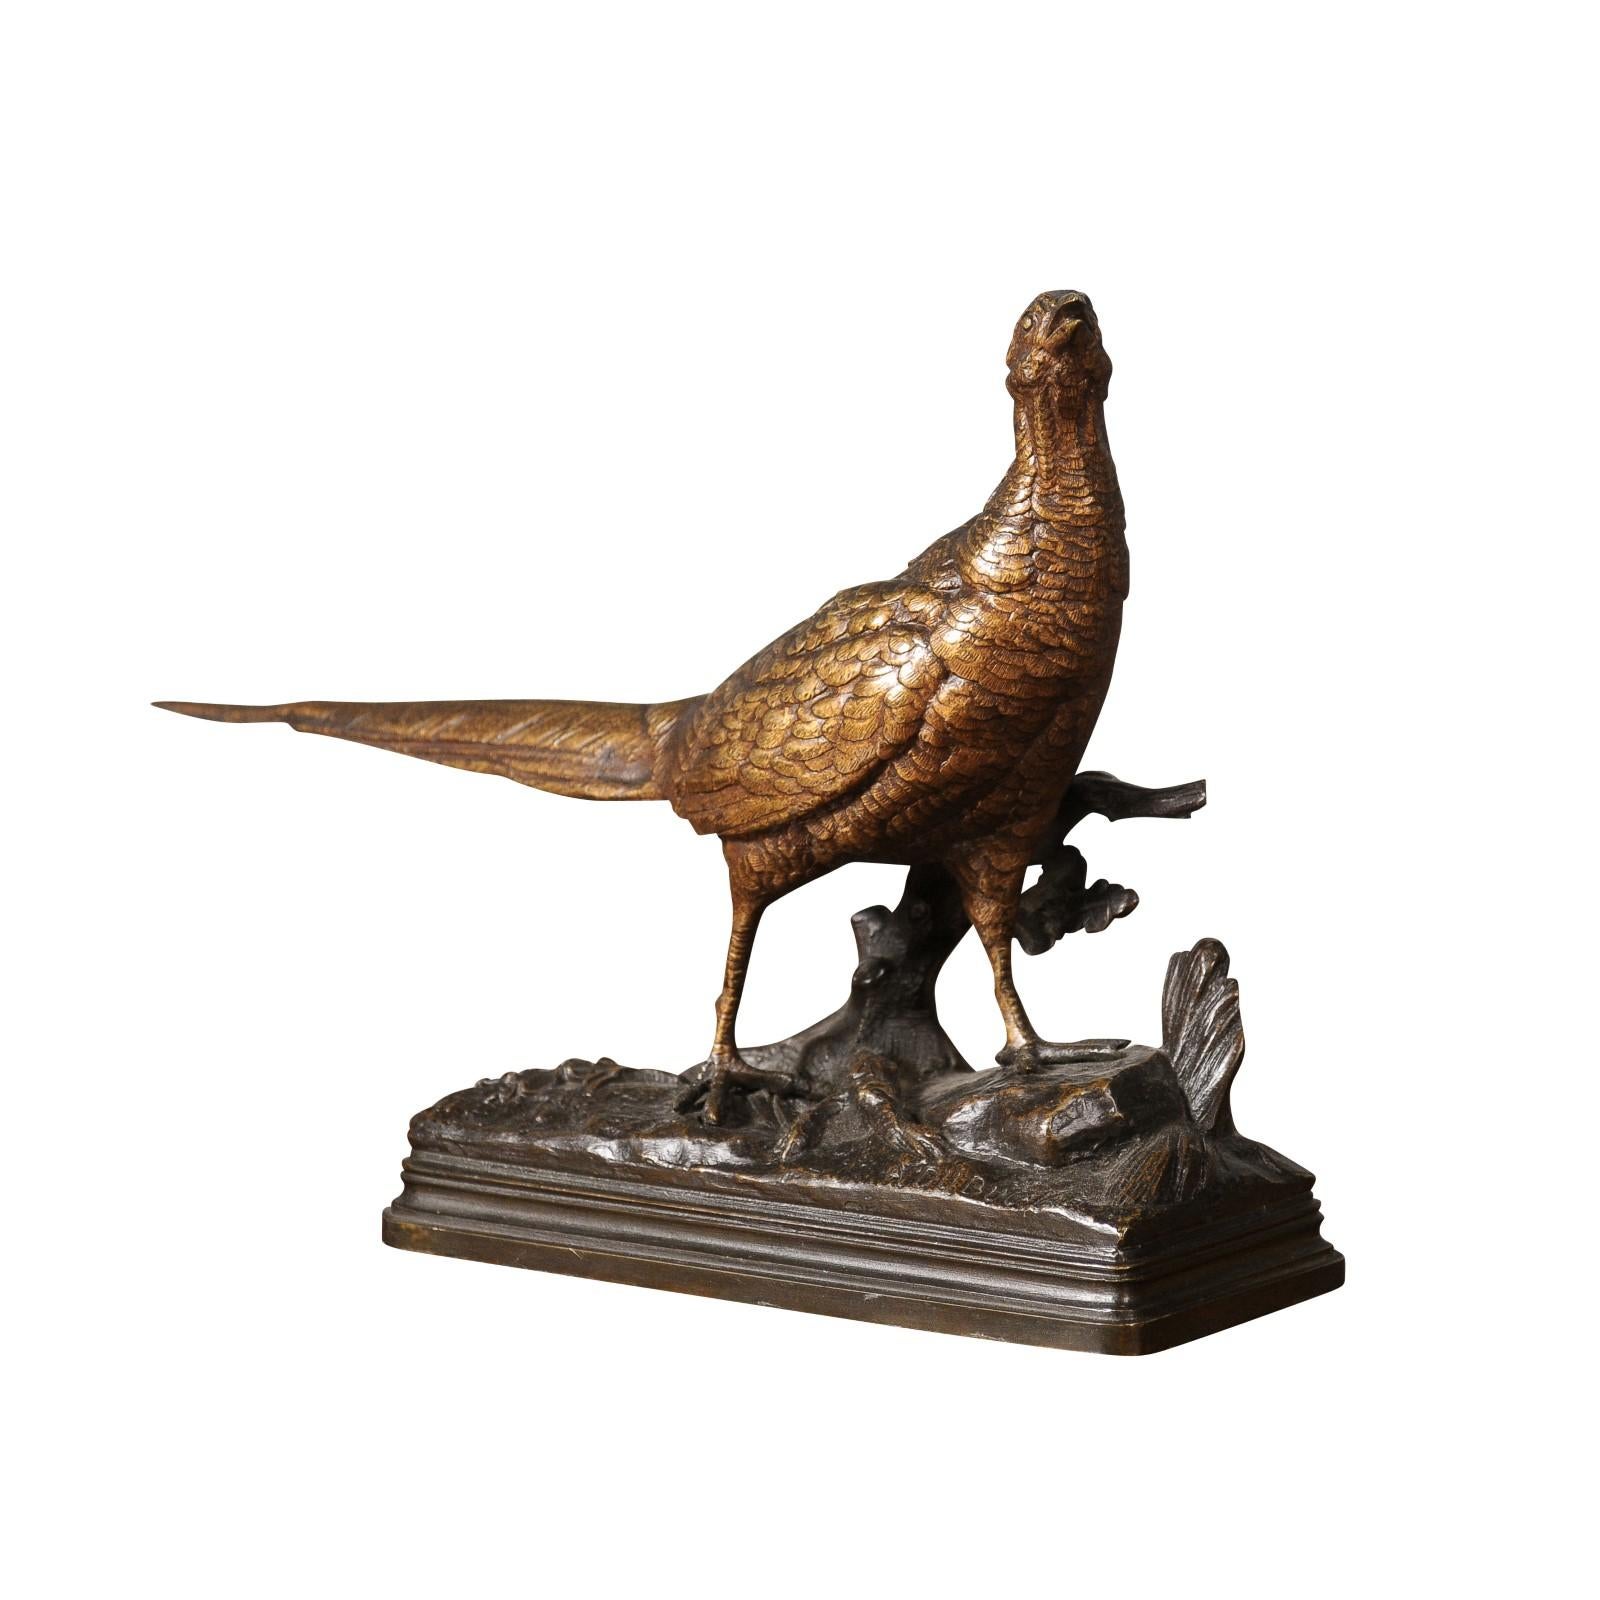 A 19th century bronze sculpture of a pheasant on a foliated base by Alfred Dubucand (1828-1894). Immerse yourself in the grandeur of nature with this exquisite 19th century bronze sculpture of a pheasant by Alfred Dubucand, an eminent French animal